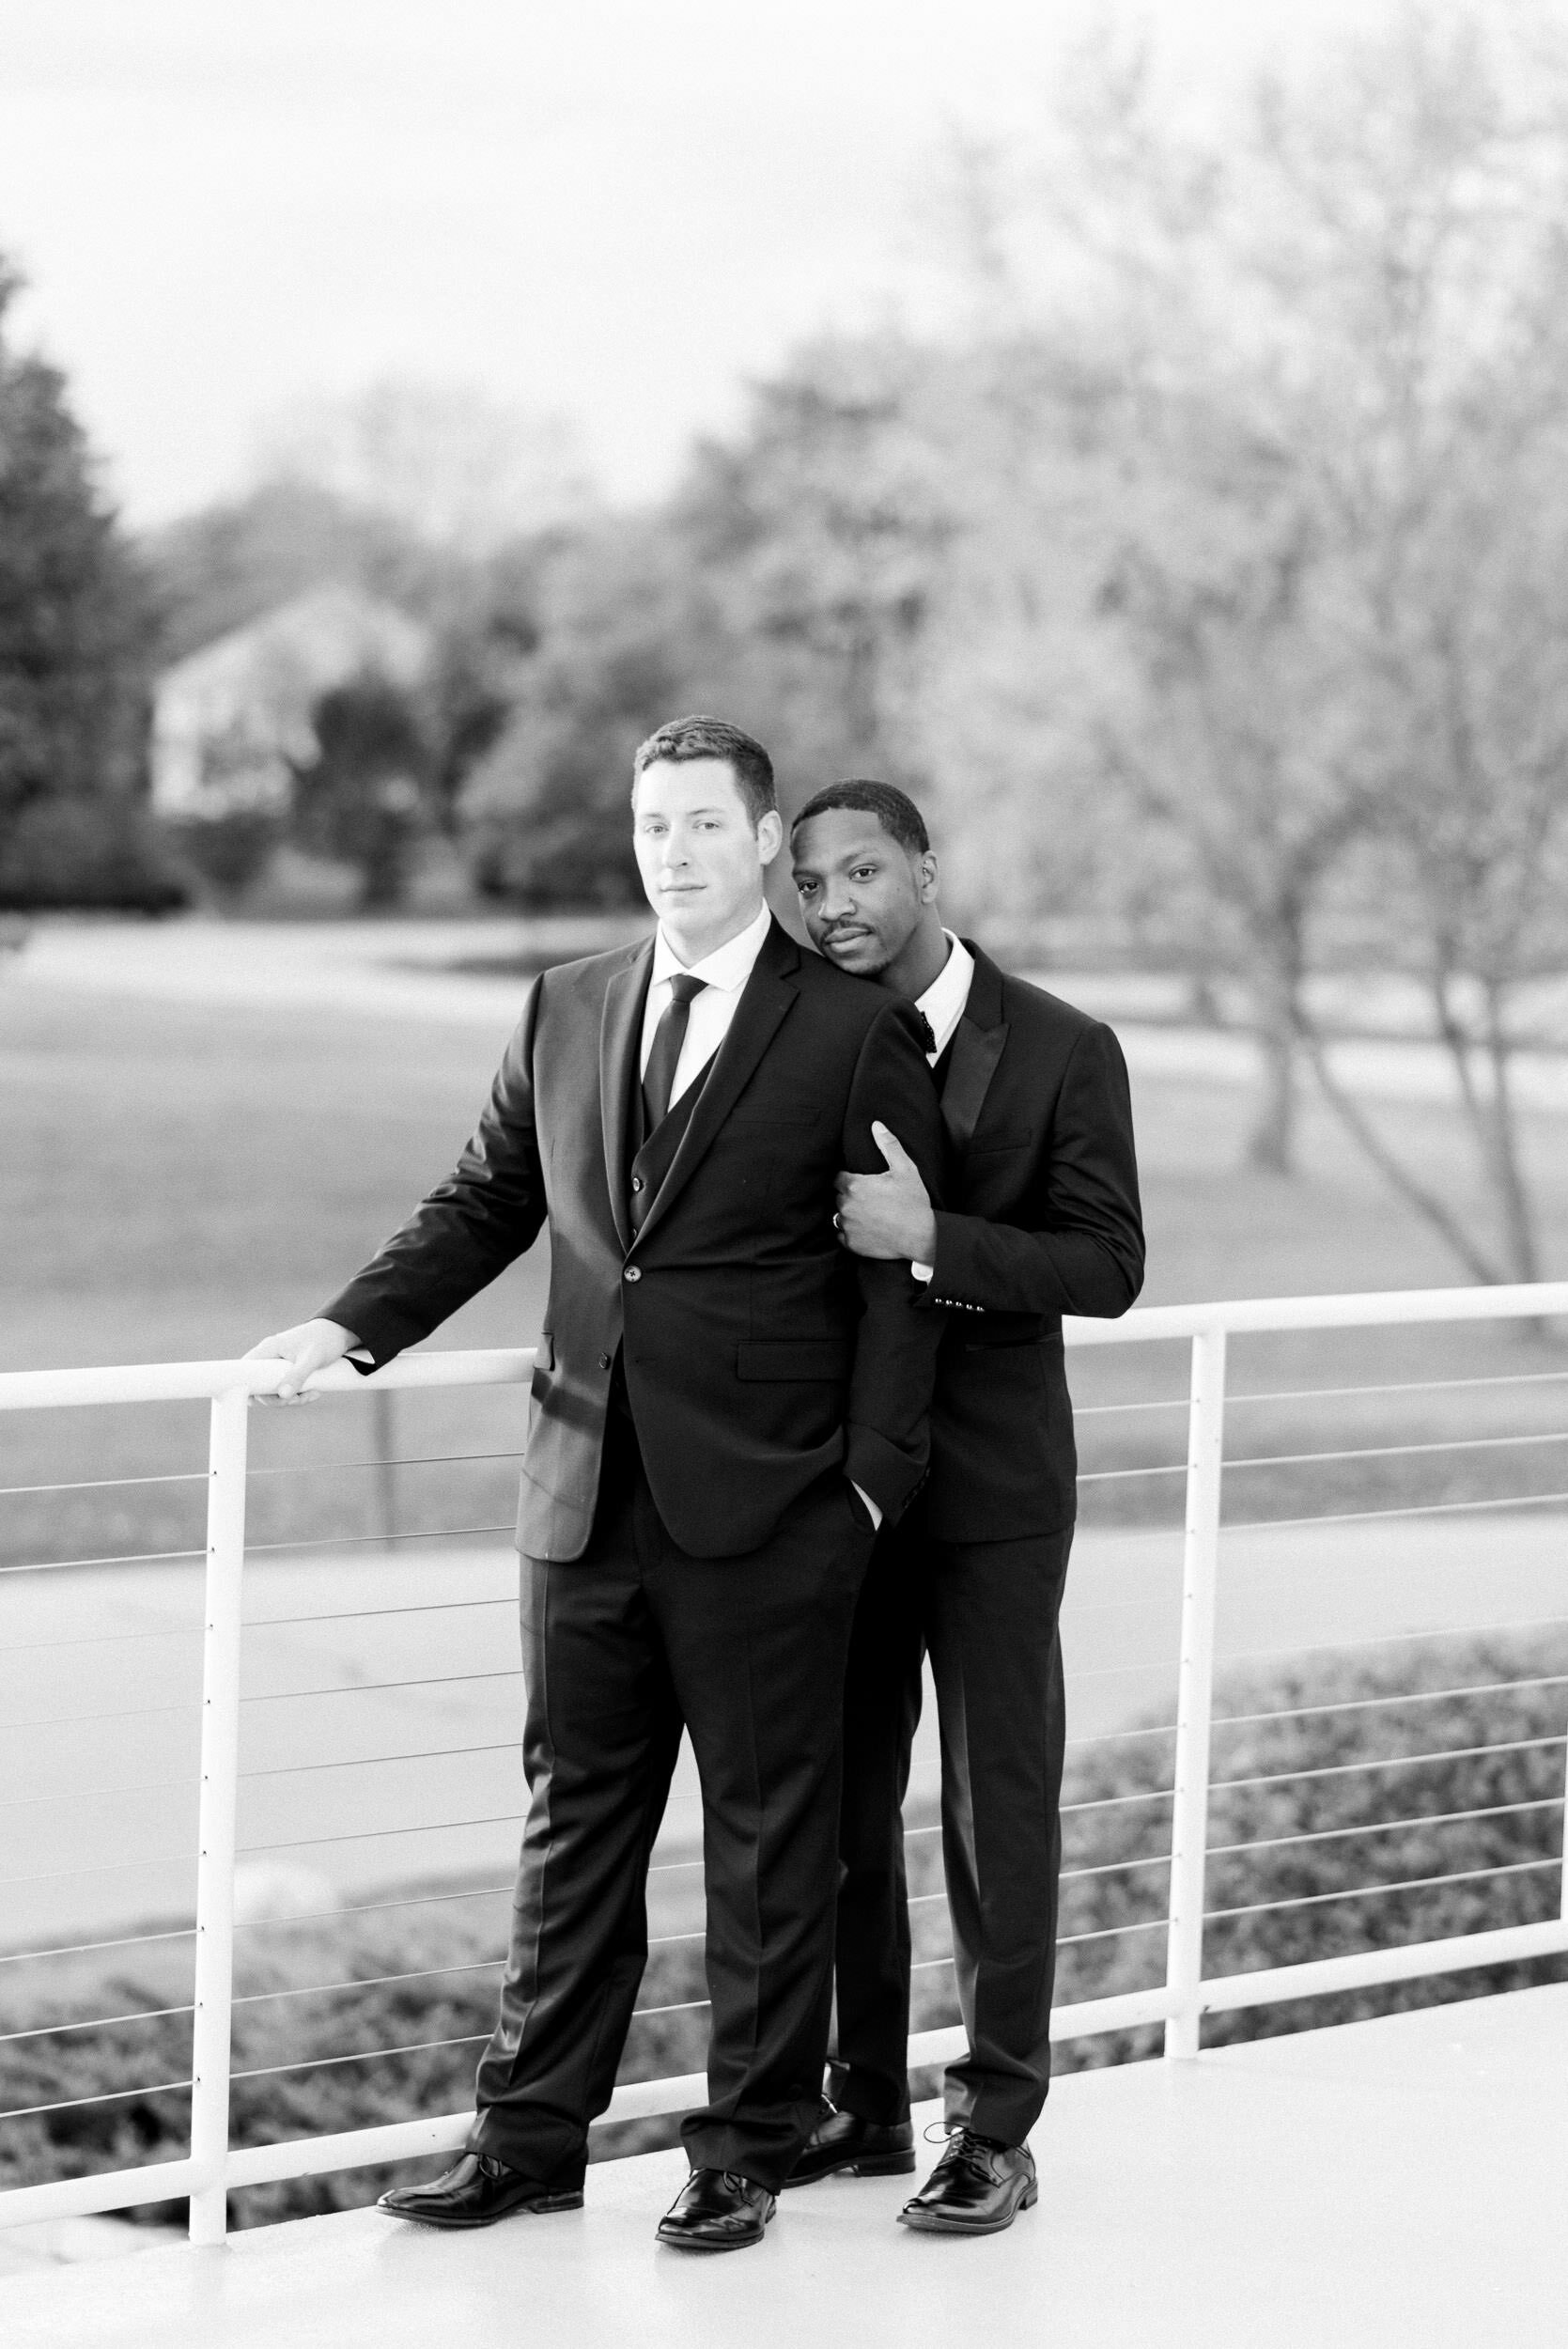 River Club of Mequon - Mequon WI - LGBT - Gay -Styled Shoot-188.jpg